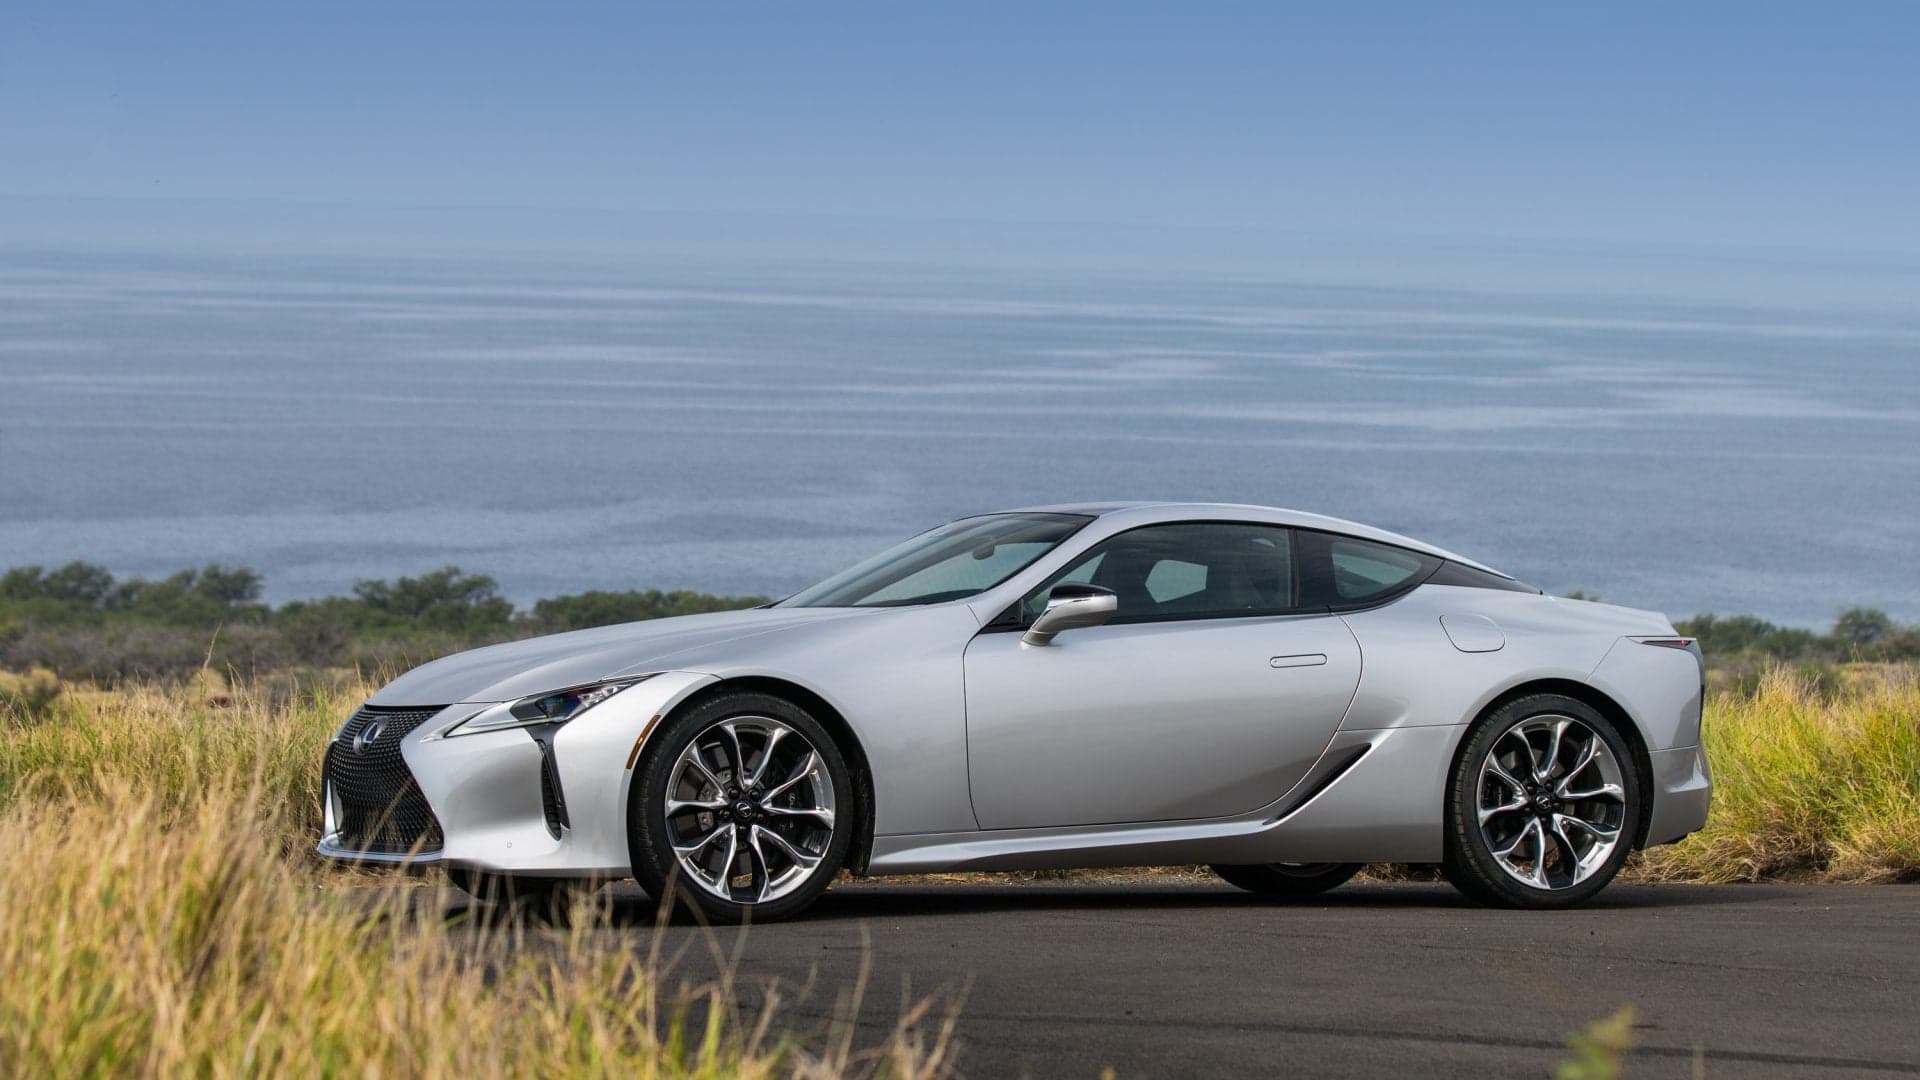 Lexus LC Convertible to Drop Its Top in the Next 18 to 24 Months, Report Says